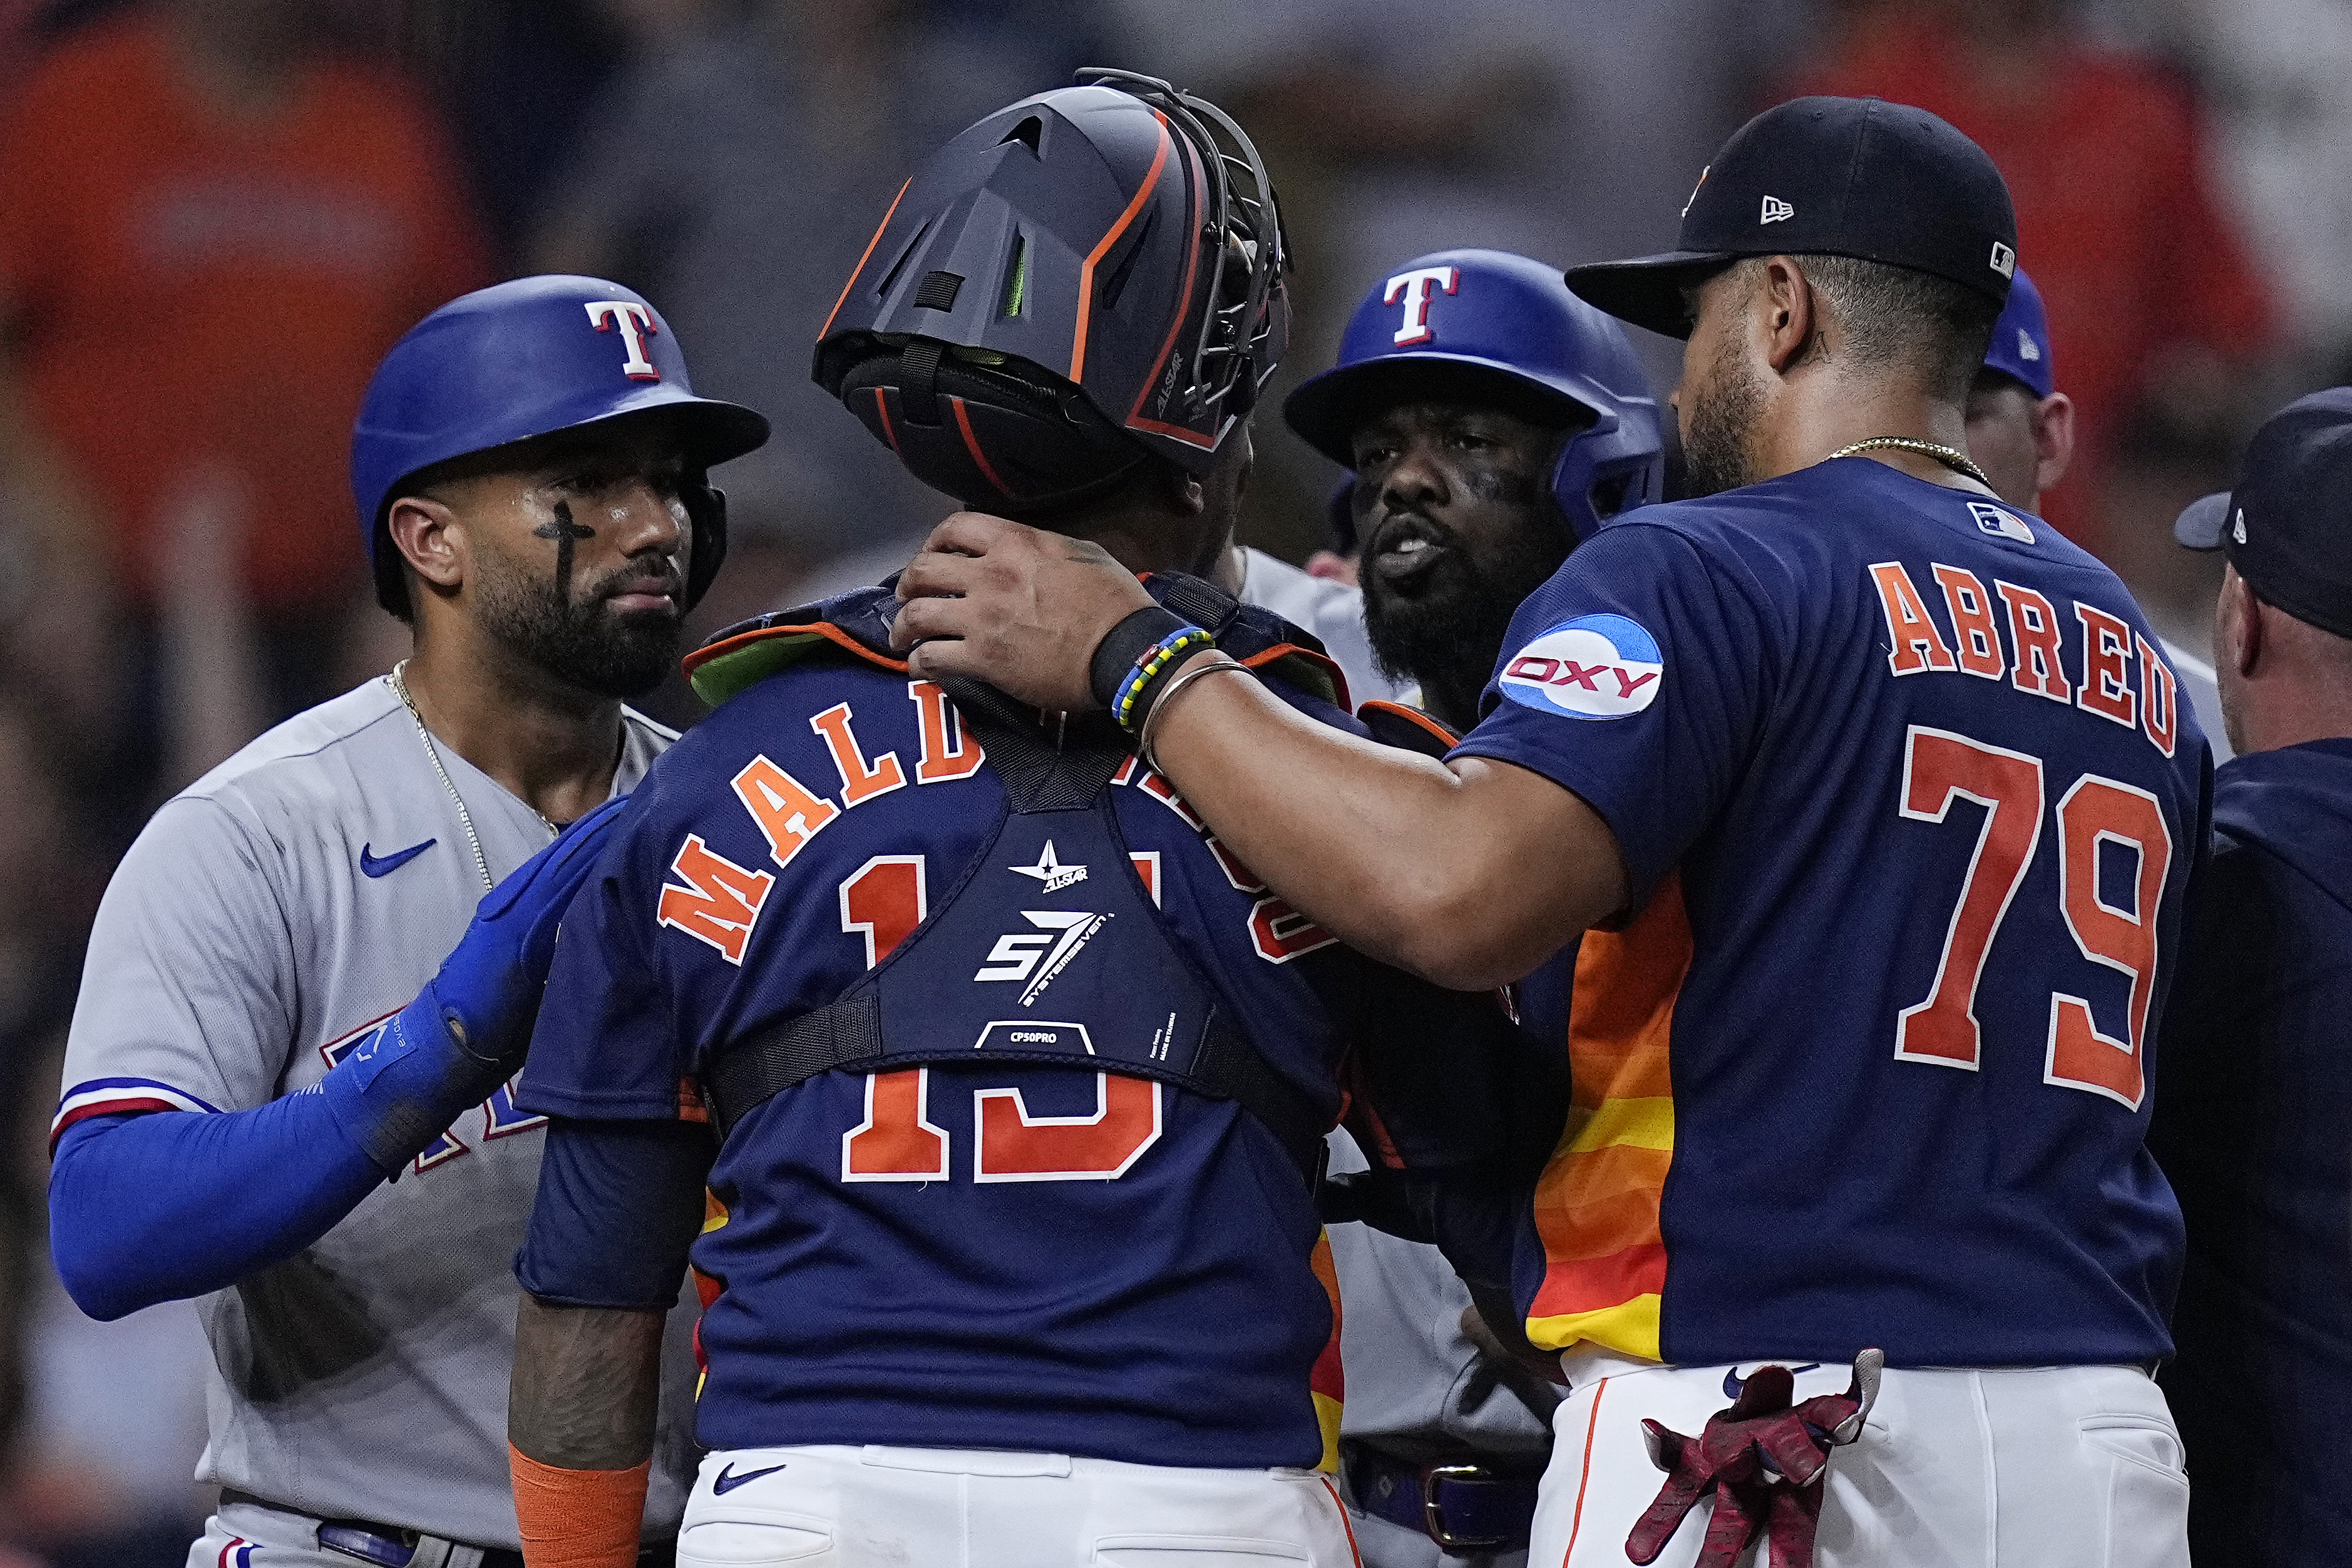 Carlos Gomez knows he's a disappointment to Astros fans